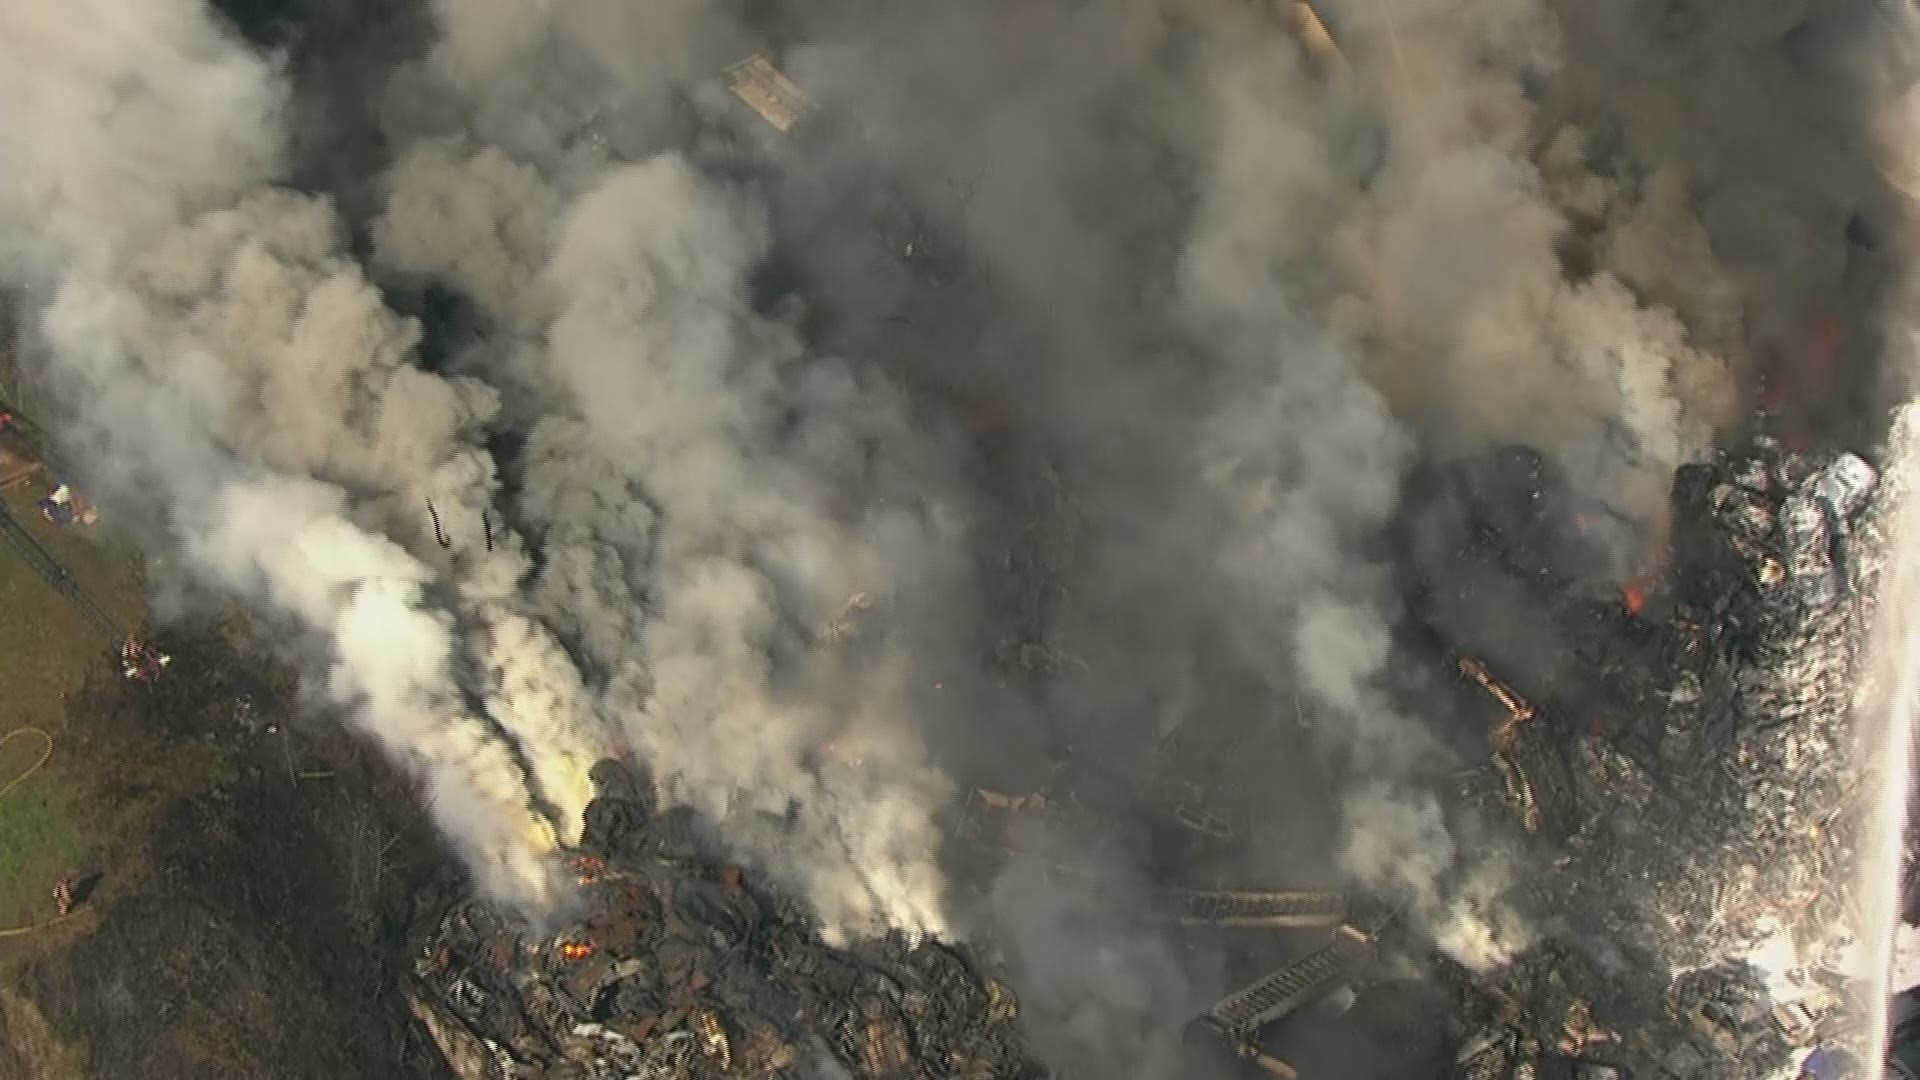 Sky8 flew above the massive fire in Northeast Portland for the noon newscast Monday. Here's a look at some of the footage that didn't make it to air.